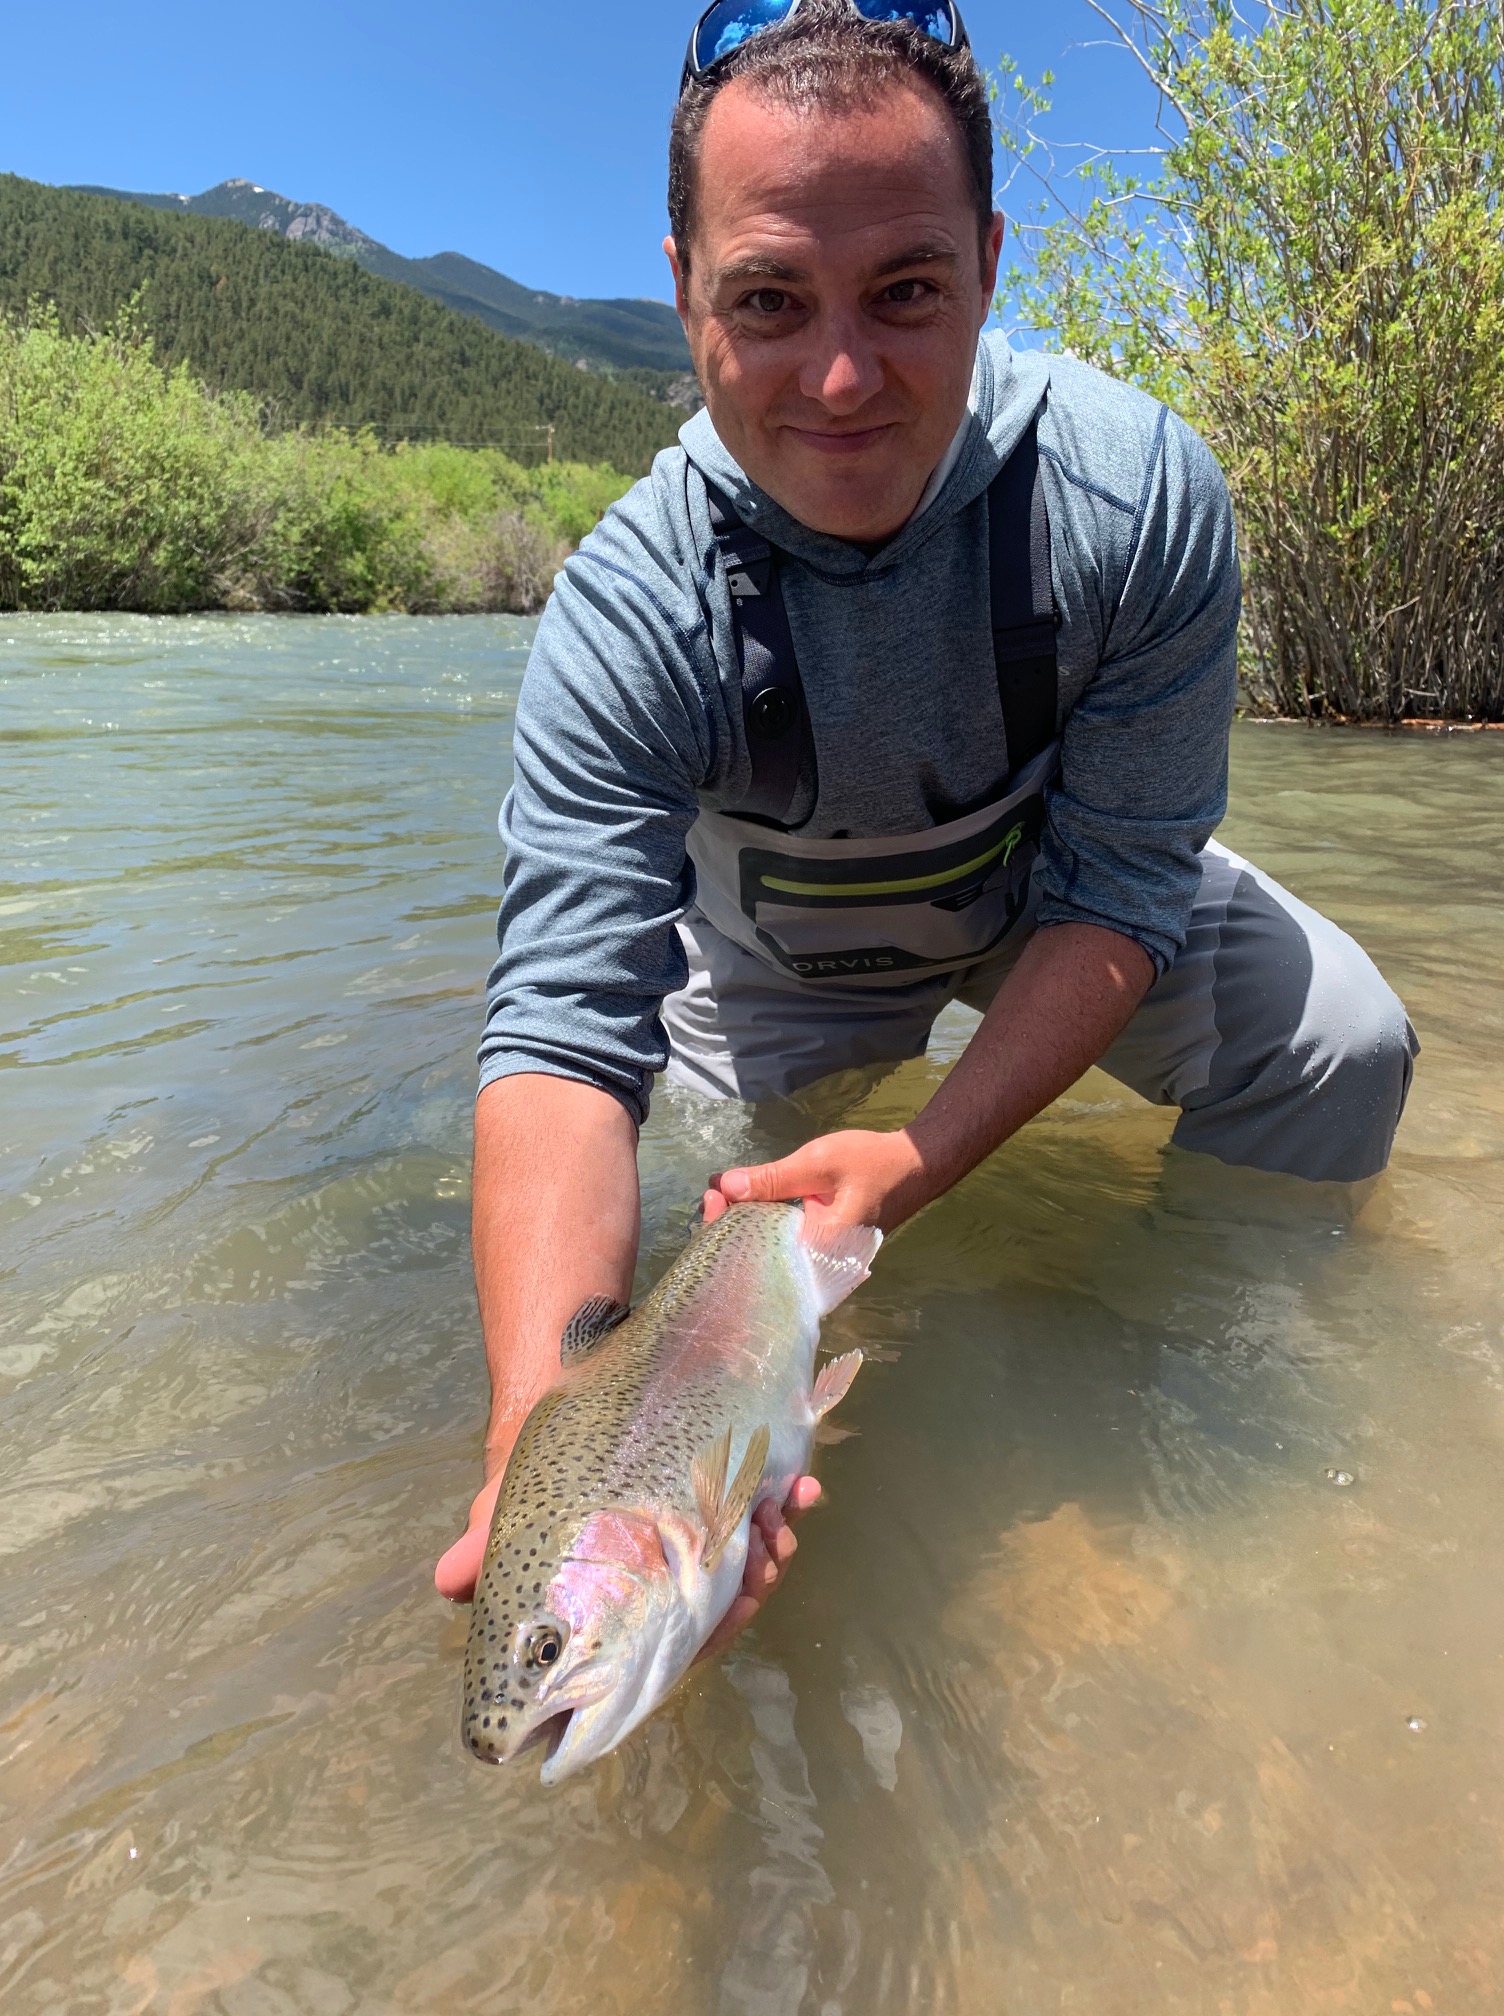 Guided fly fishing near Denver at Shawnee Ranch! - Colorado Trout Hunters